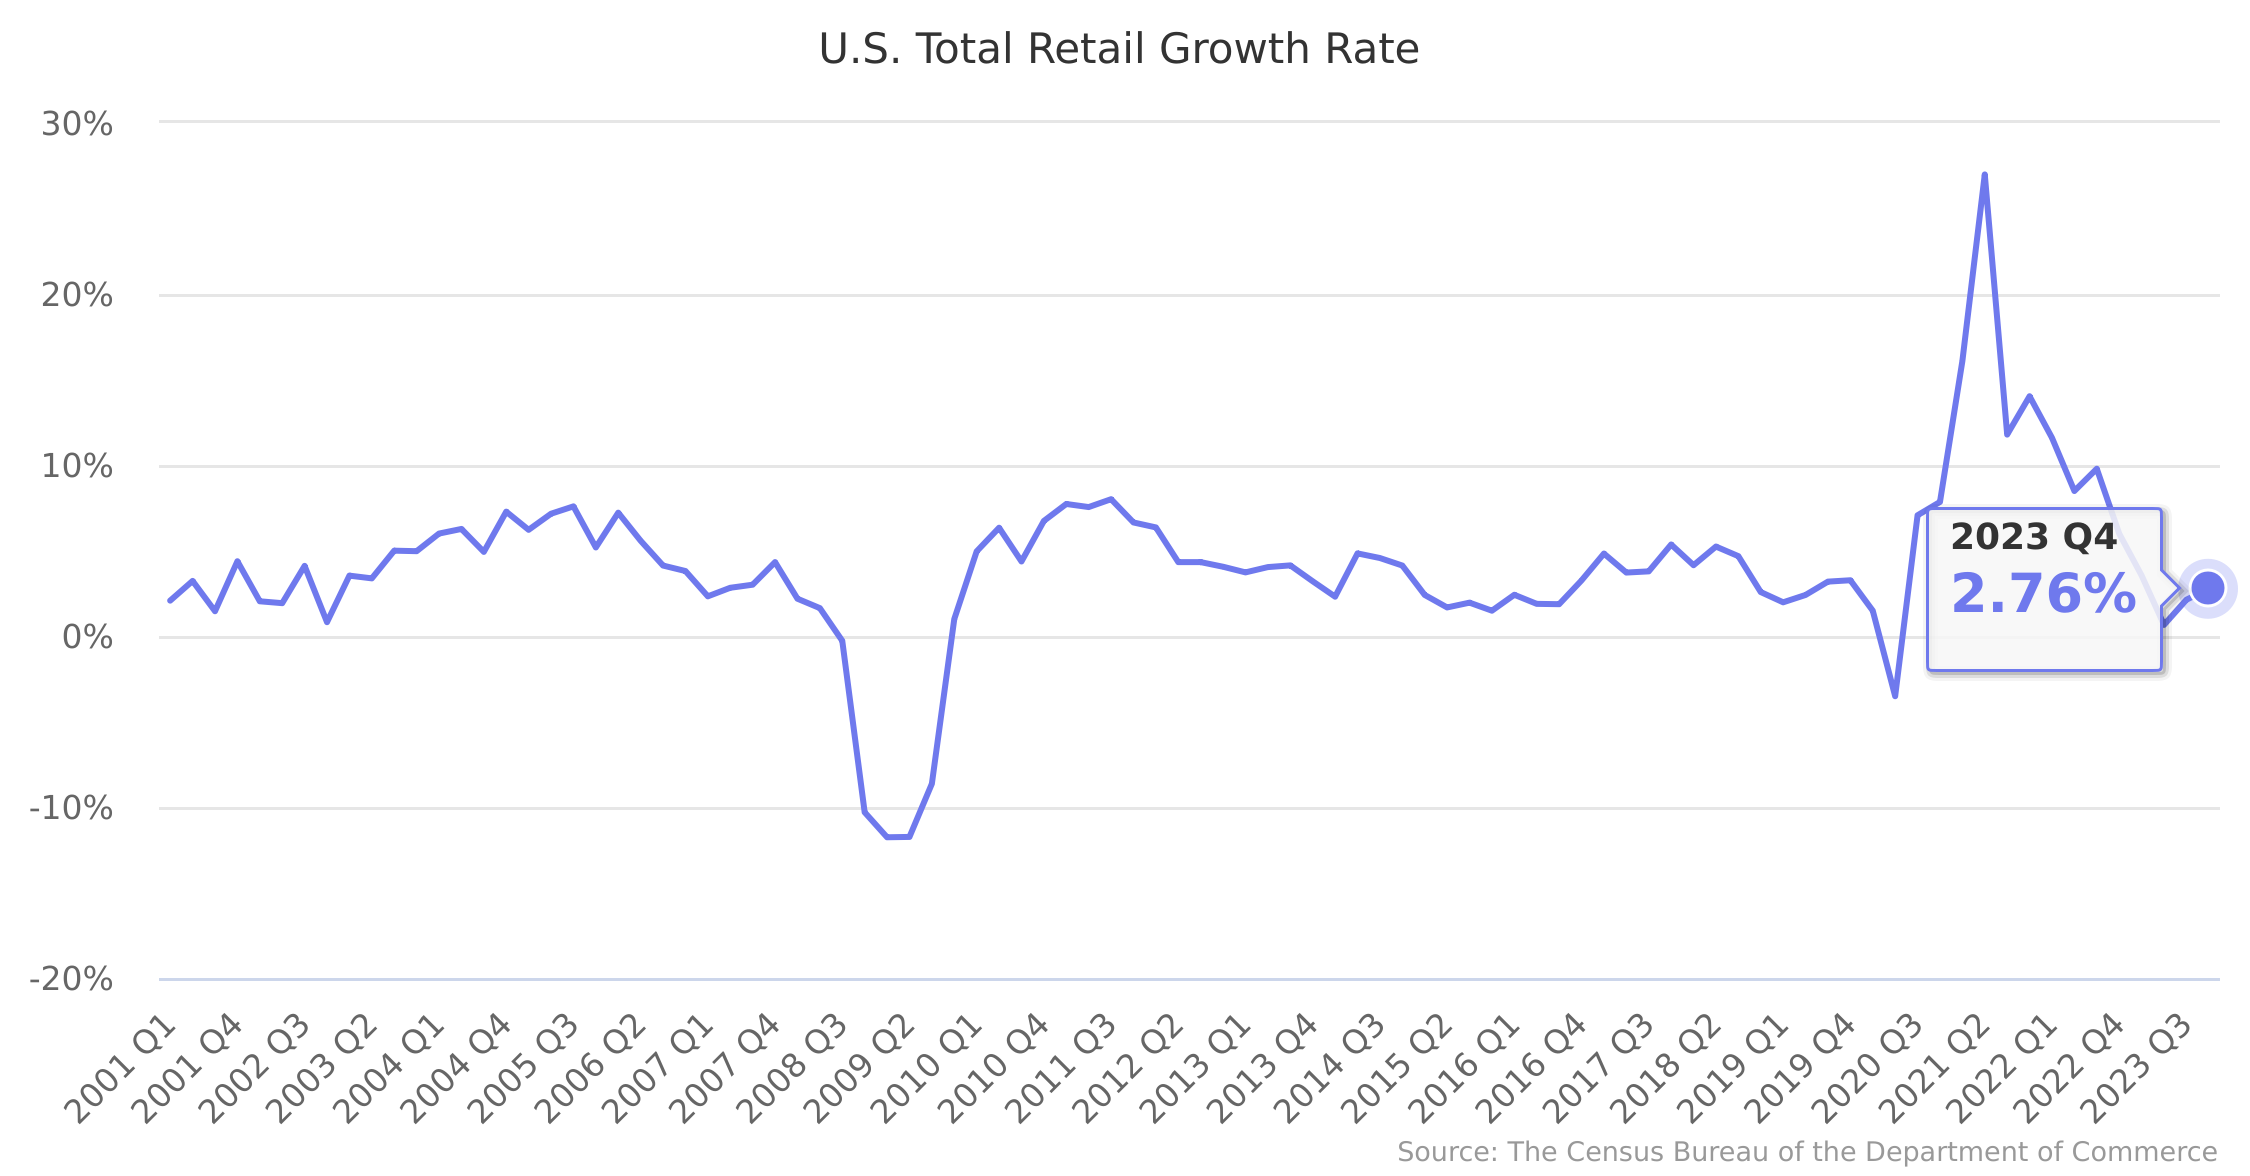 U.S. Total Retail Growth Rate 2001-2022